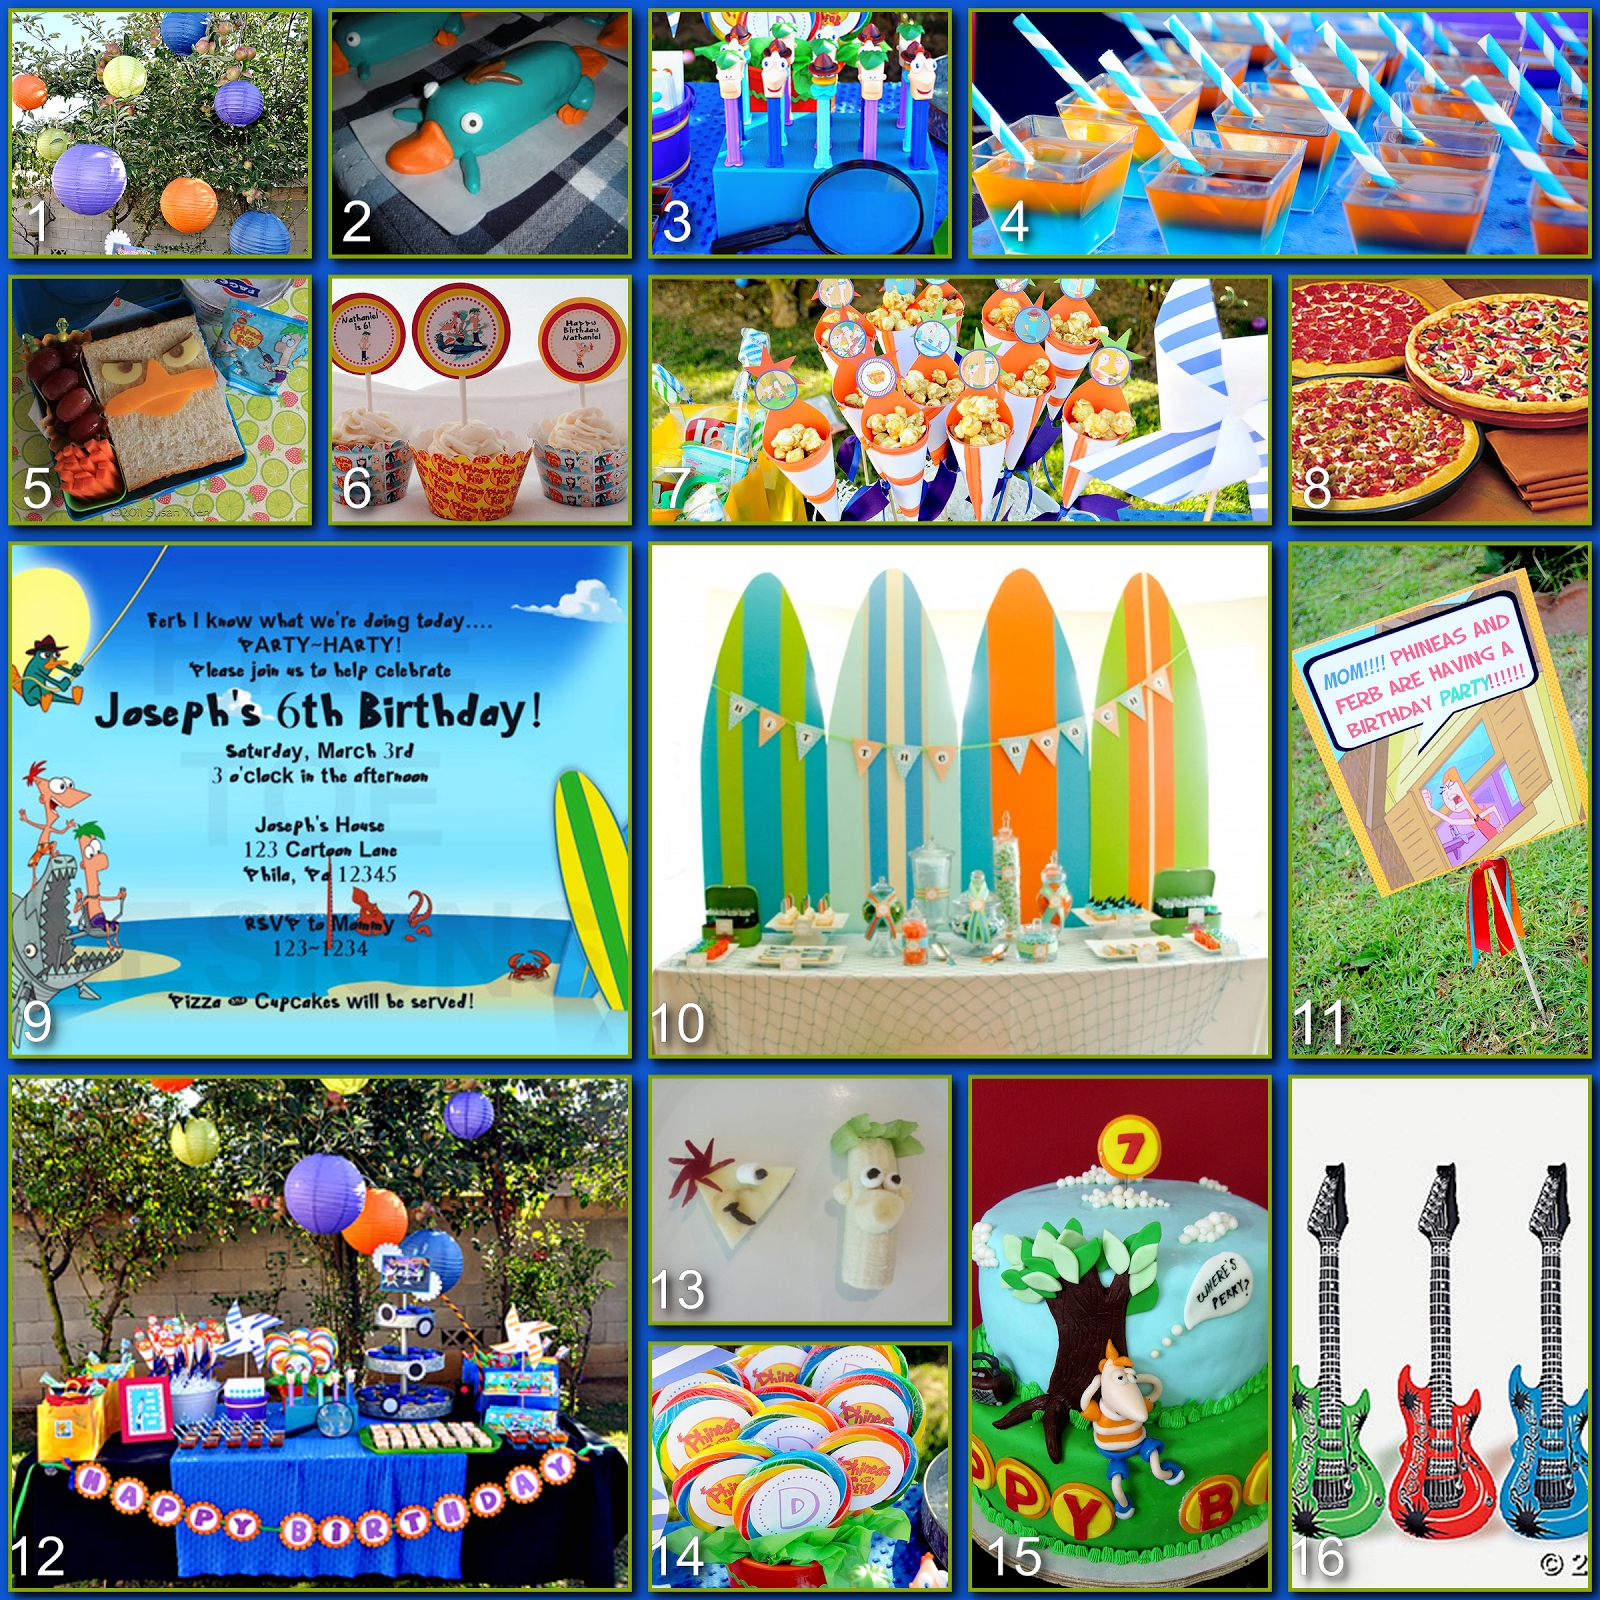 10 Elegant Phineas And Ferb Birthday Party Ideas birthday party ideas birthday party ideas phineas and ferb 2022